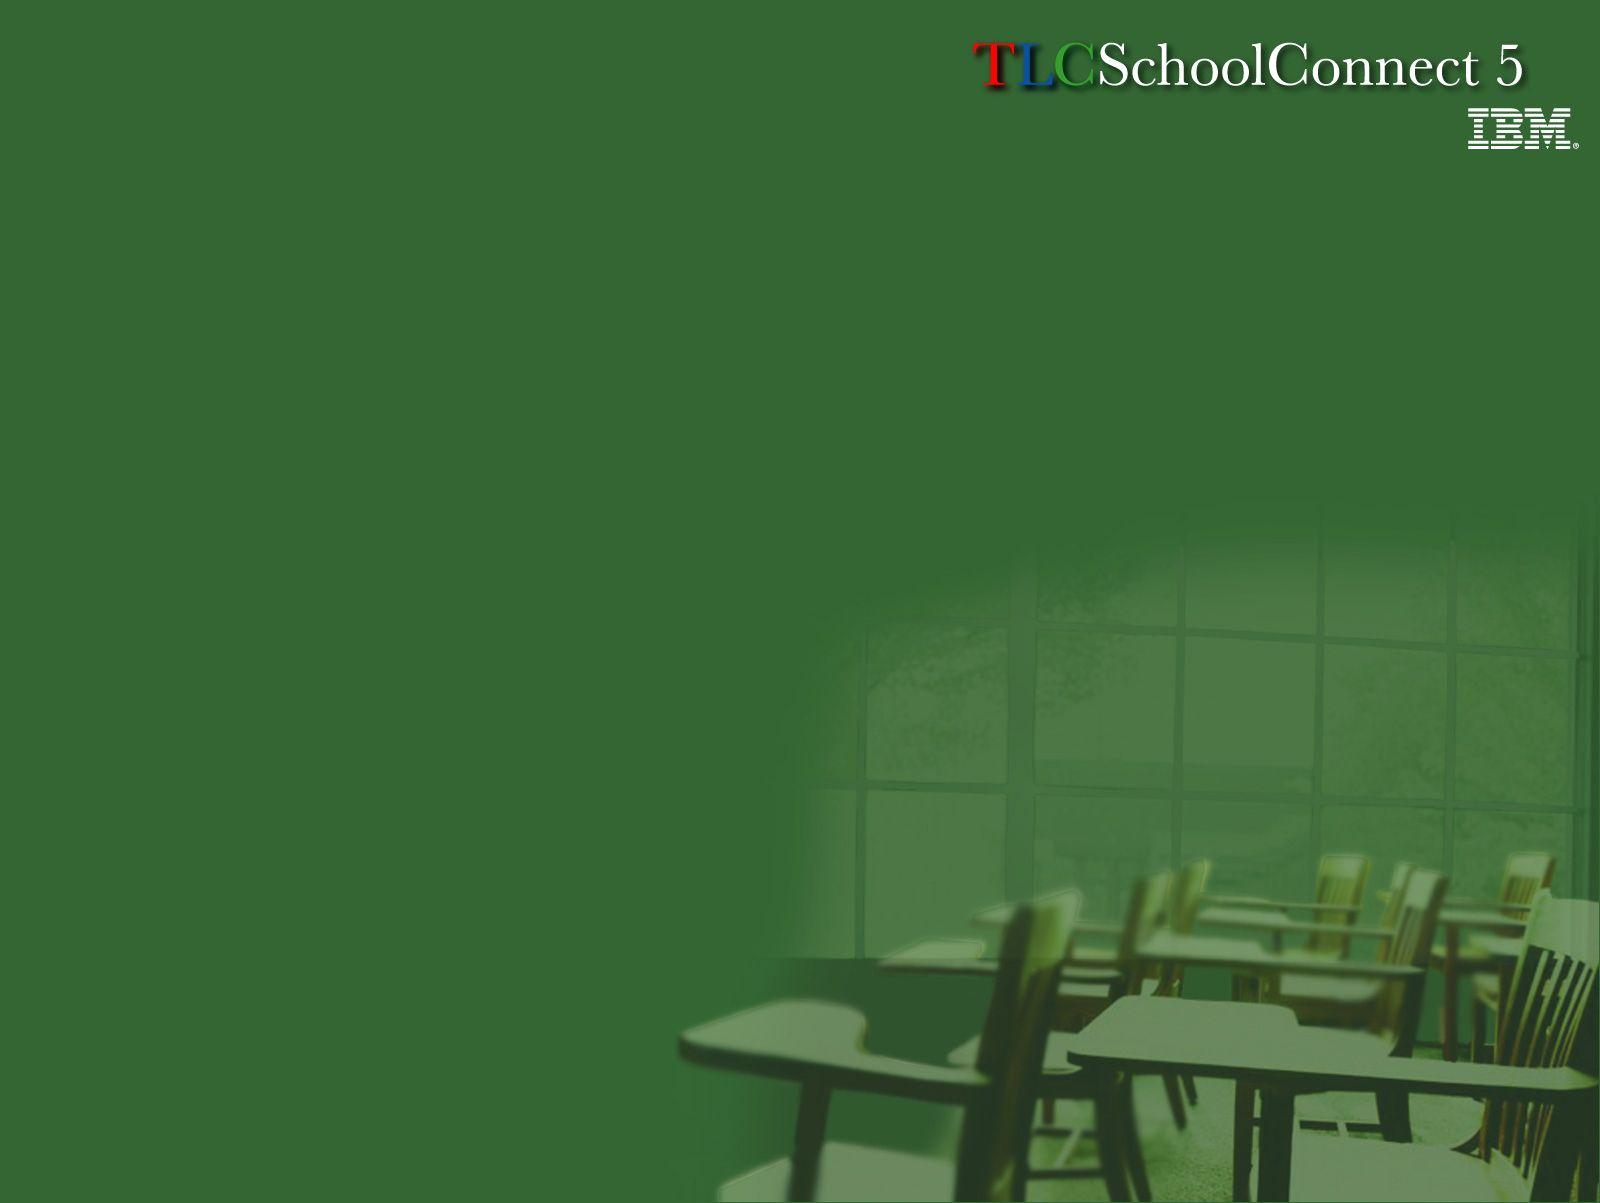 Teacher Background Images HD Pictures For Free Vectors Download   Lovepikcom